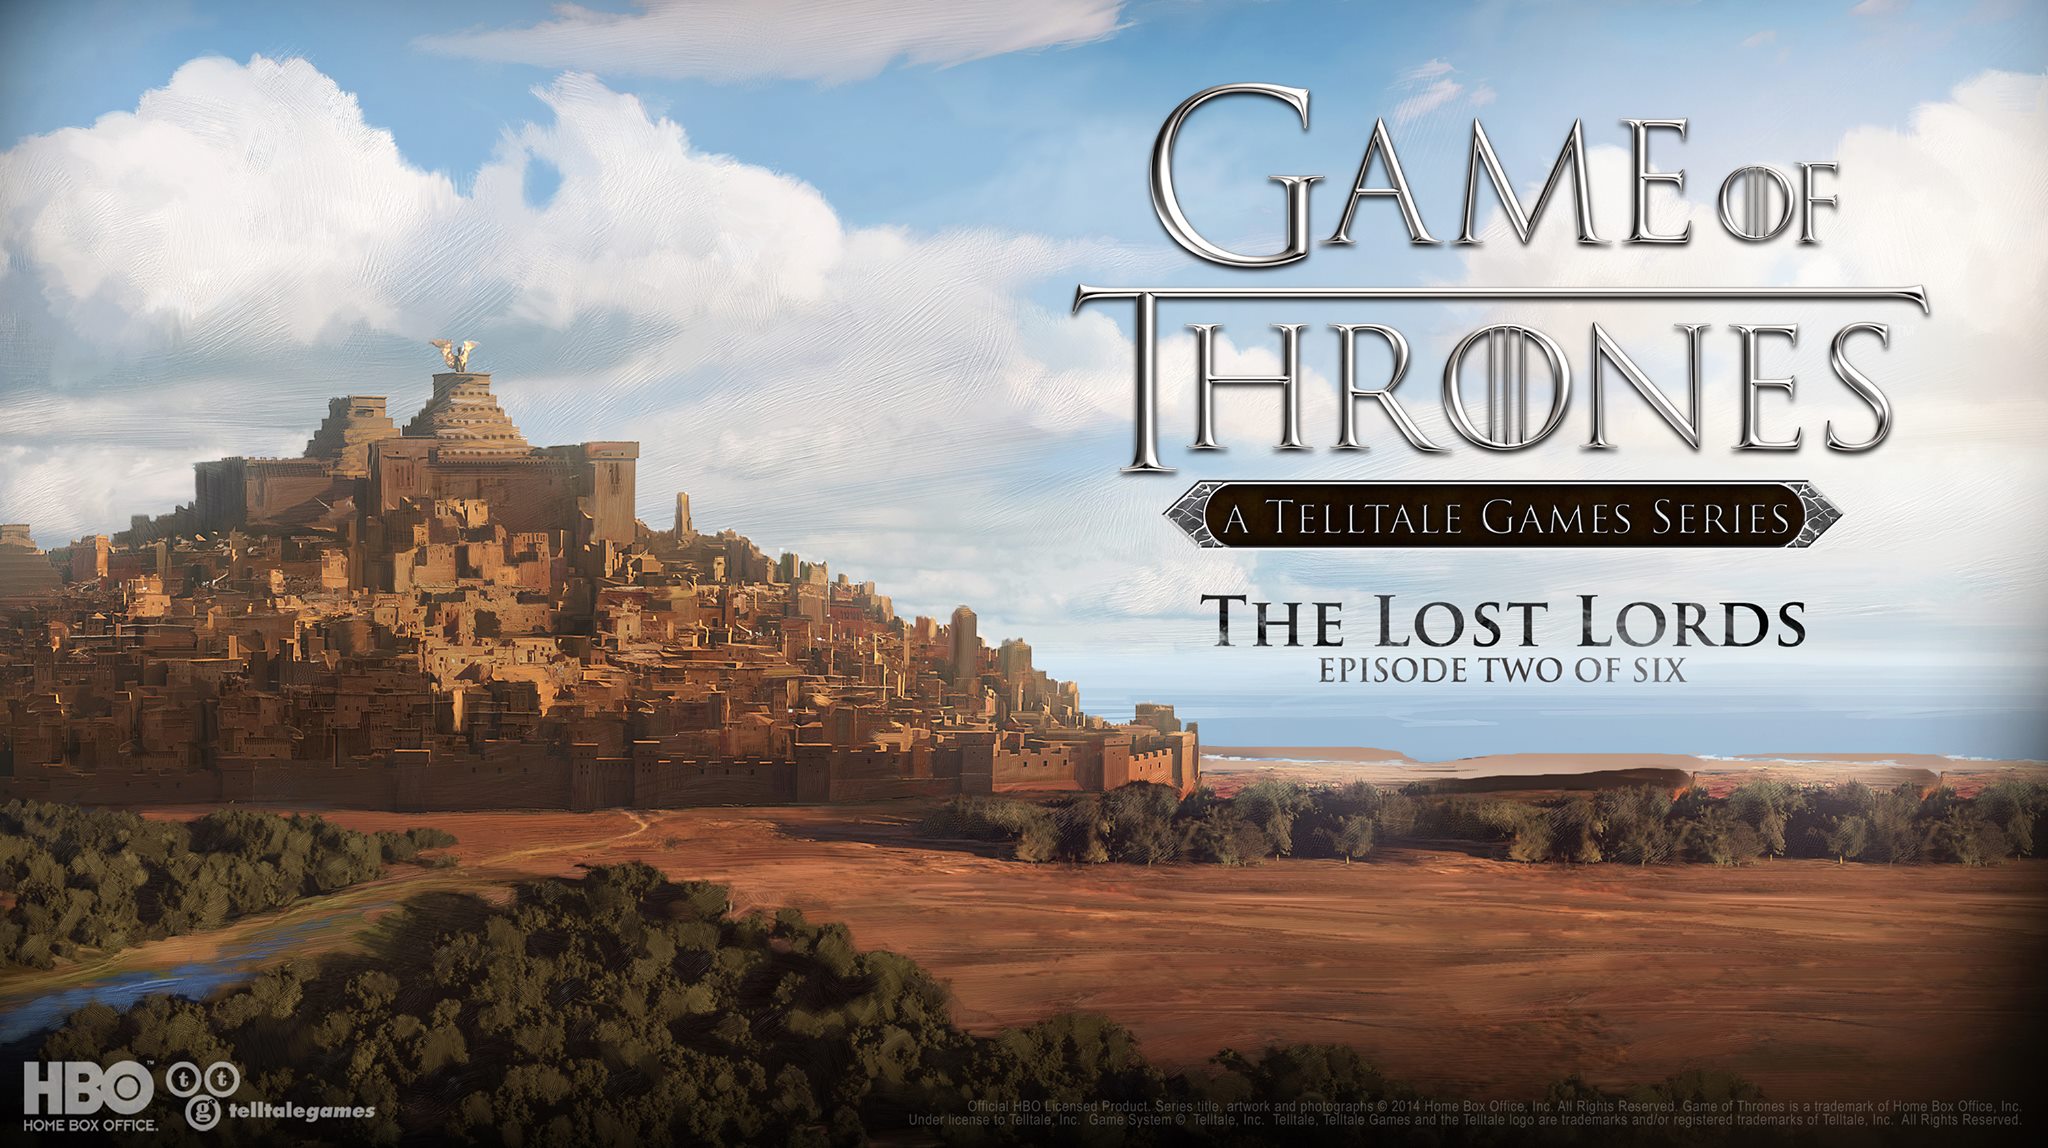 Take a look at the Game of Thrones: The Lost Lords launch trailer